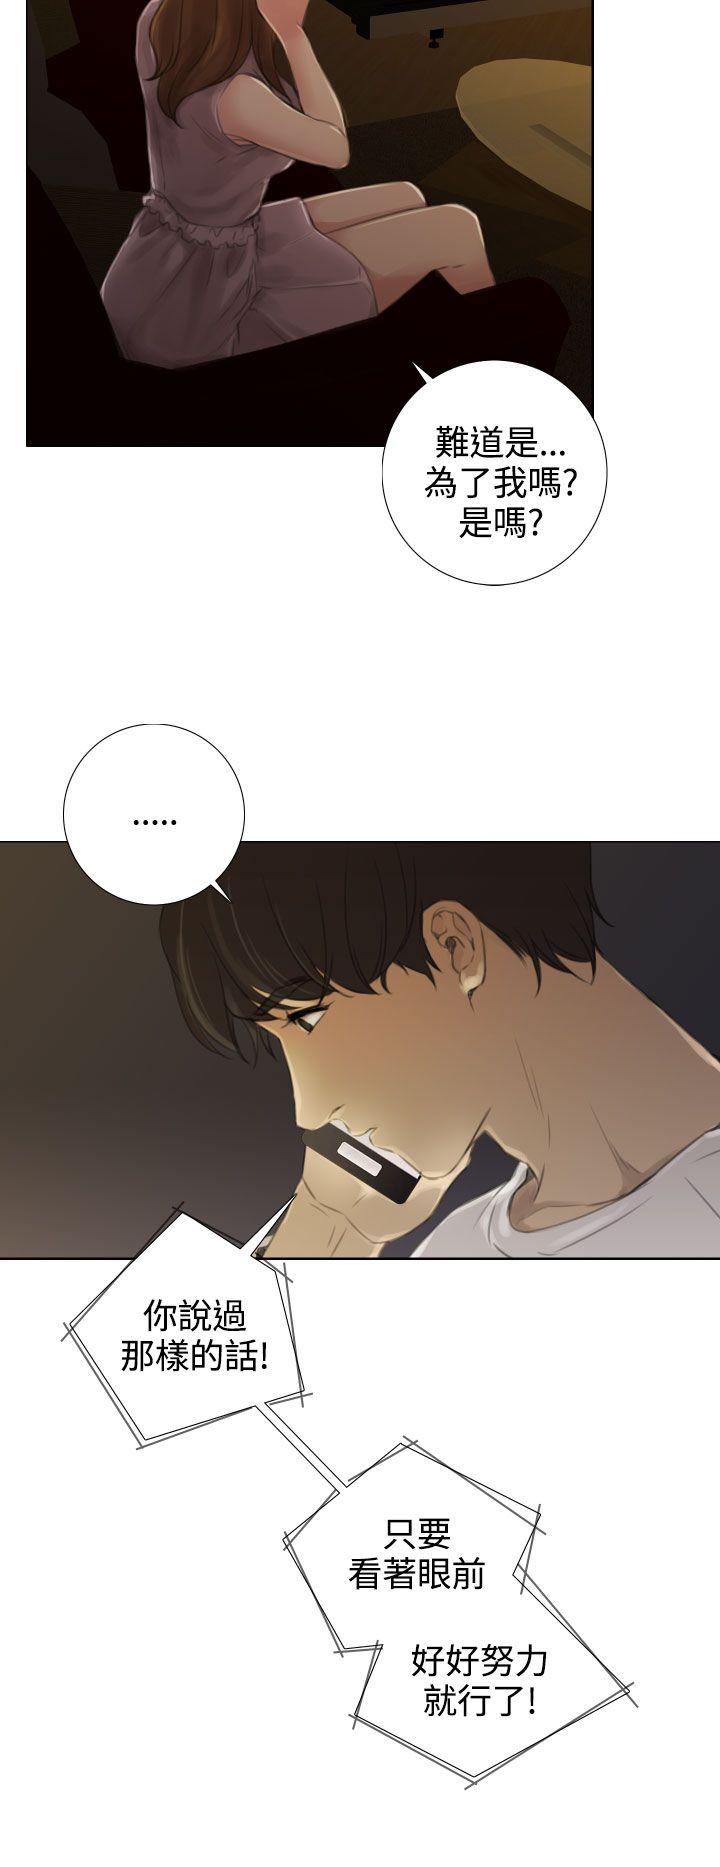 《TOUCH ME》漫画 第13话